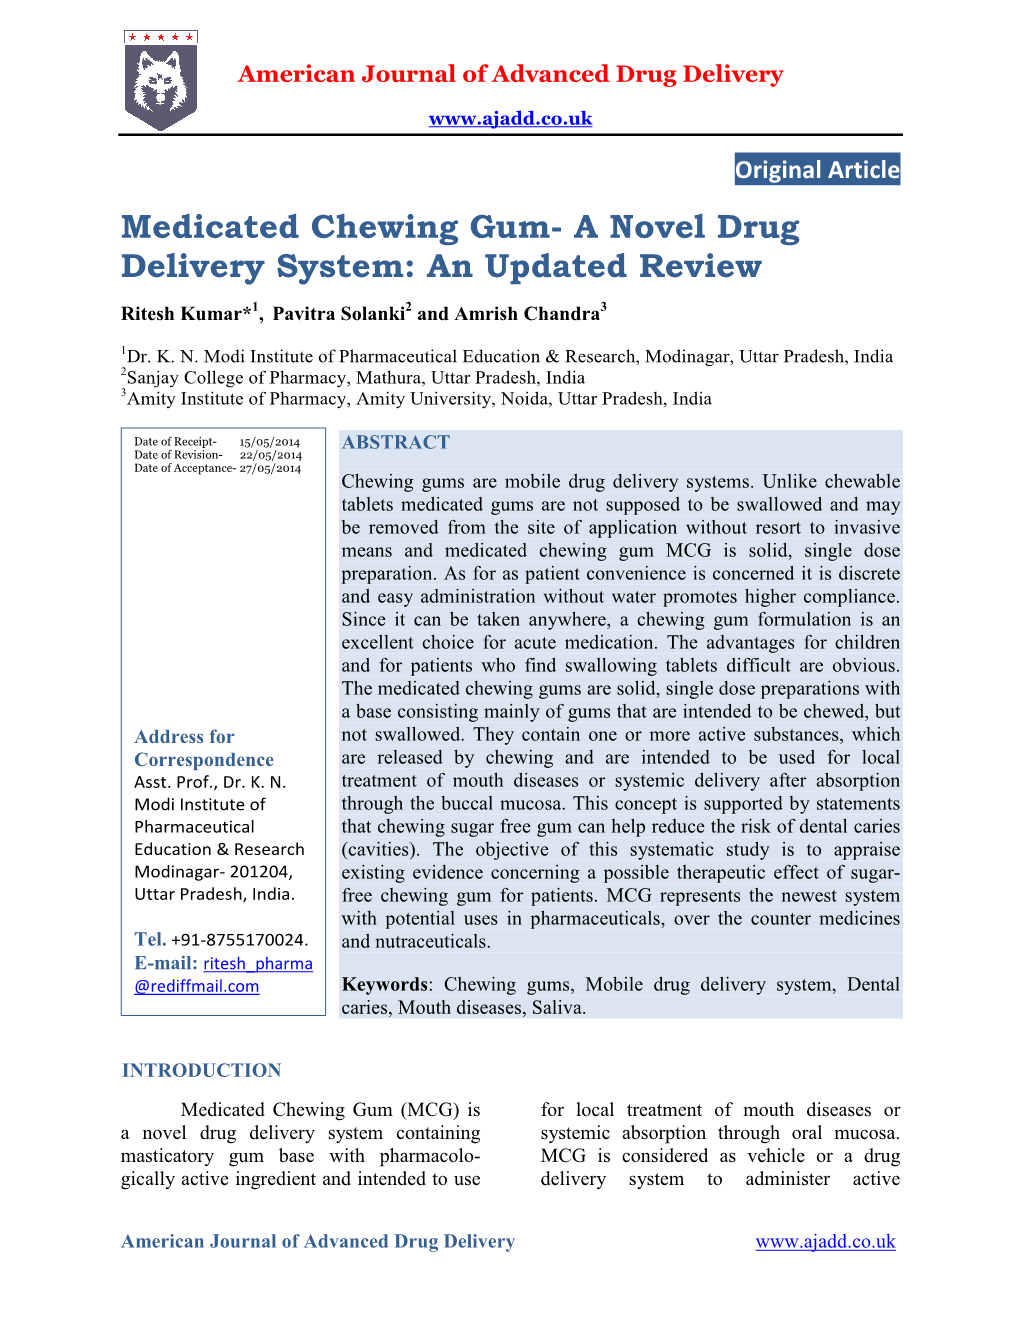 Medicated Chewing Gum- a Novel Drug Delivery System: an Updated Review Ritesh Kumar* 1, Pavitra Solanki 2 and Amrish Chandra 3